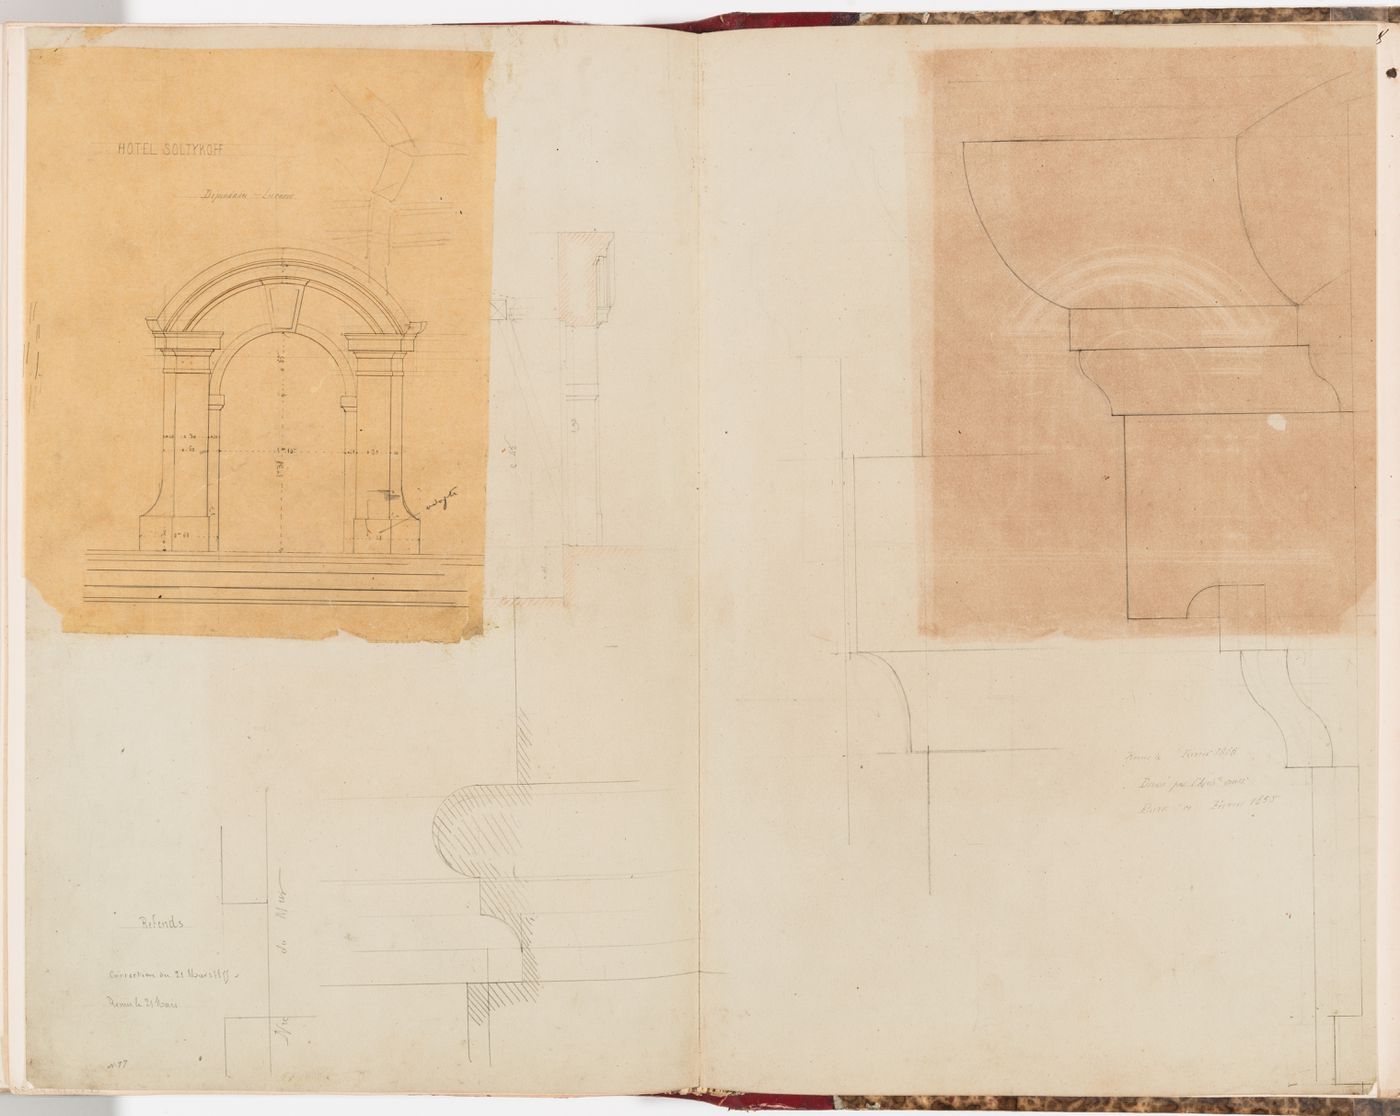 Elevation, wall section and full-scale details for the moulding for the dormer windows for the outbuilding, Hôtel Soltykoff